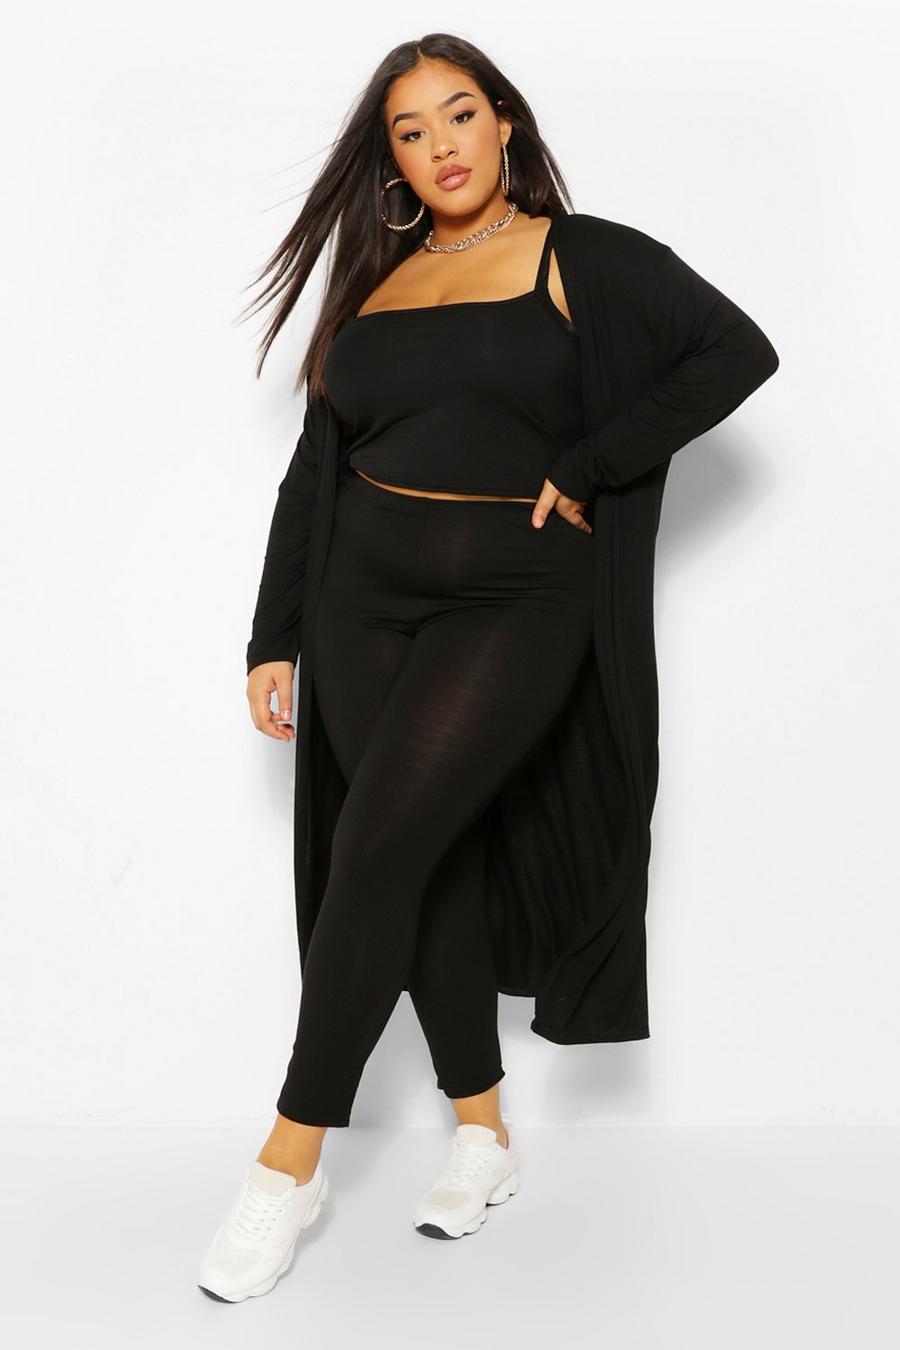 JNGSA Plus Size 2 Piece Outfits for Women,Plus Size Lounge Two